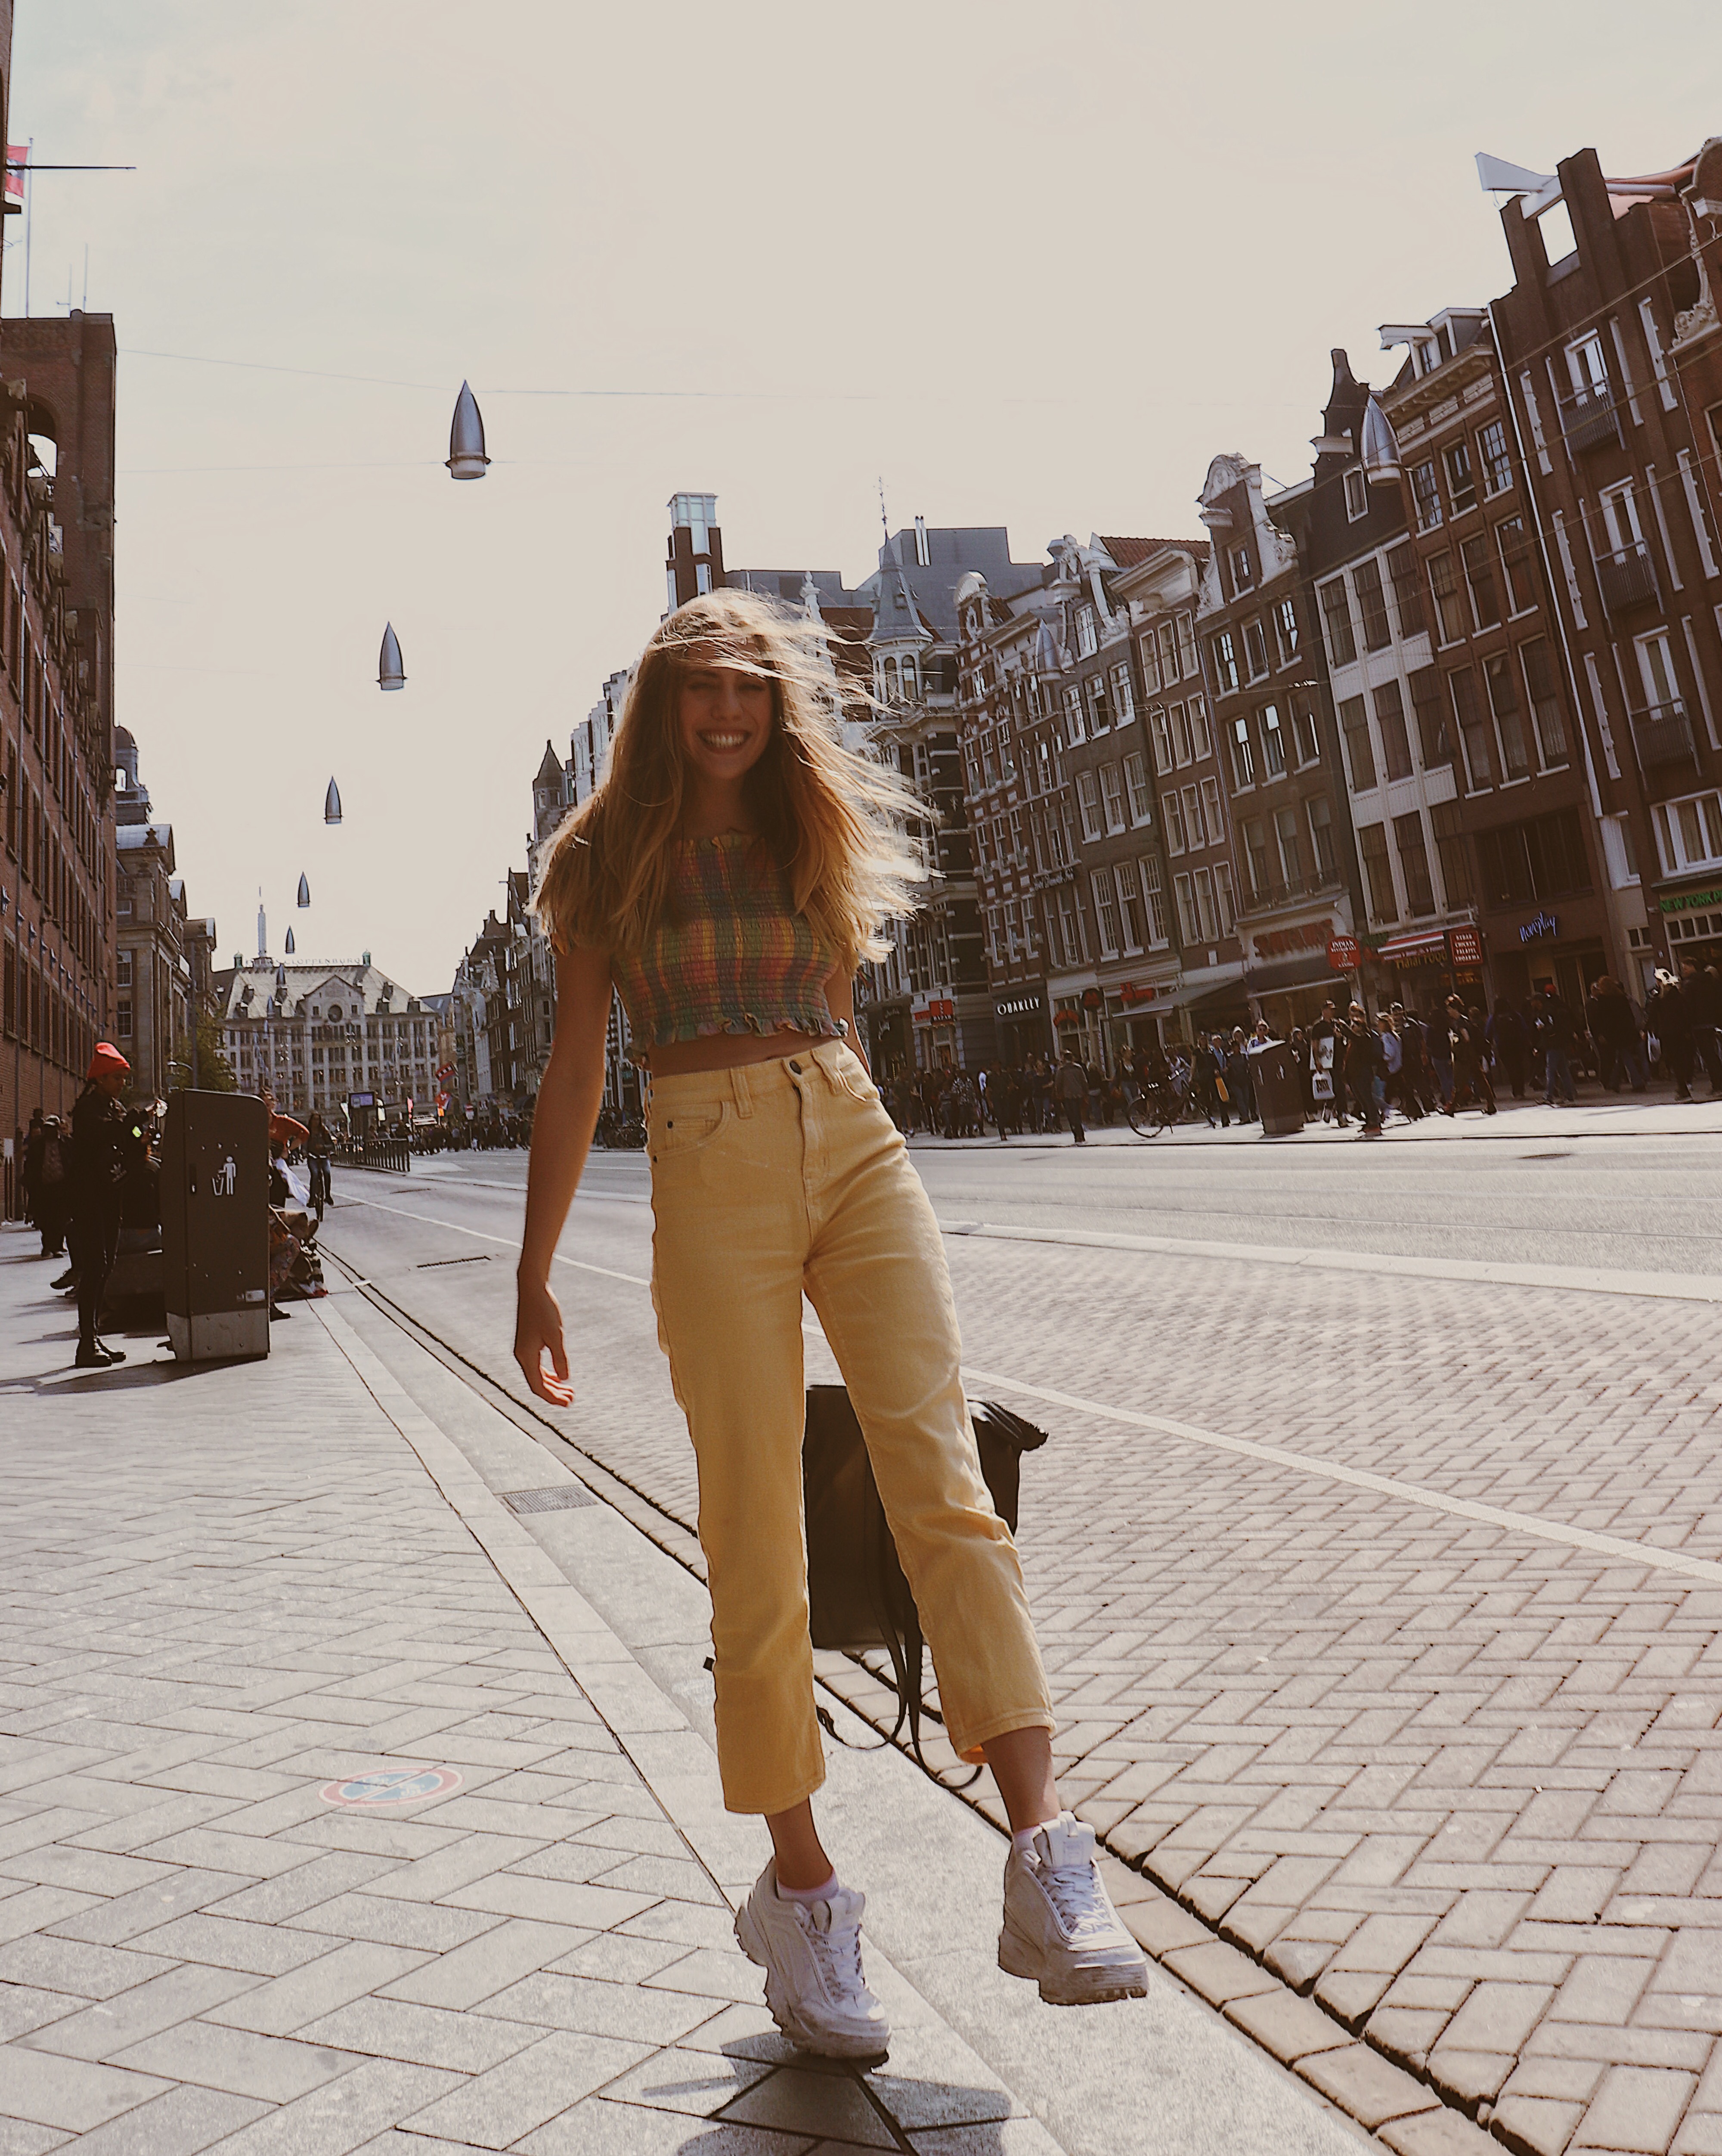 Candace staning on a brick sidewalk in Amsterdam, Netherlands wearing yellow jeans and a pastel plaid crop top form Urban Outfitters and white Fila tennis shoes.